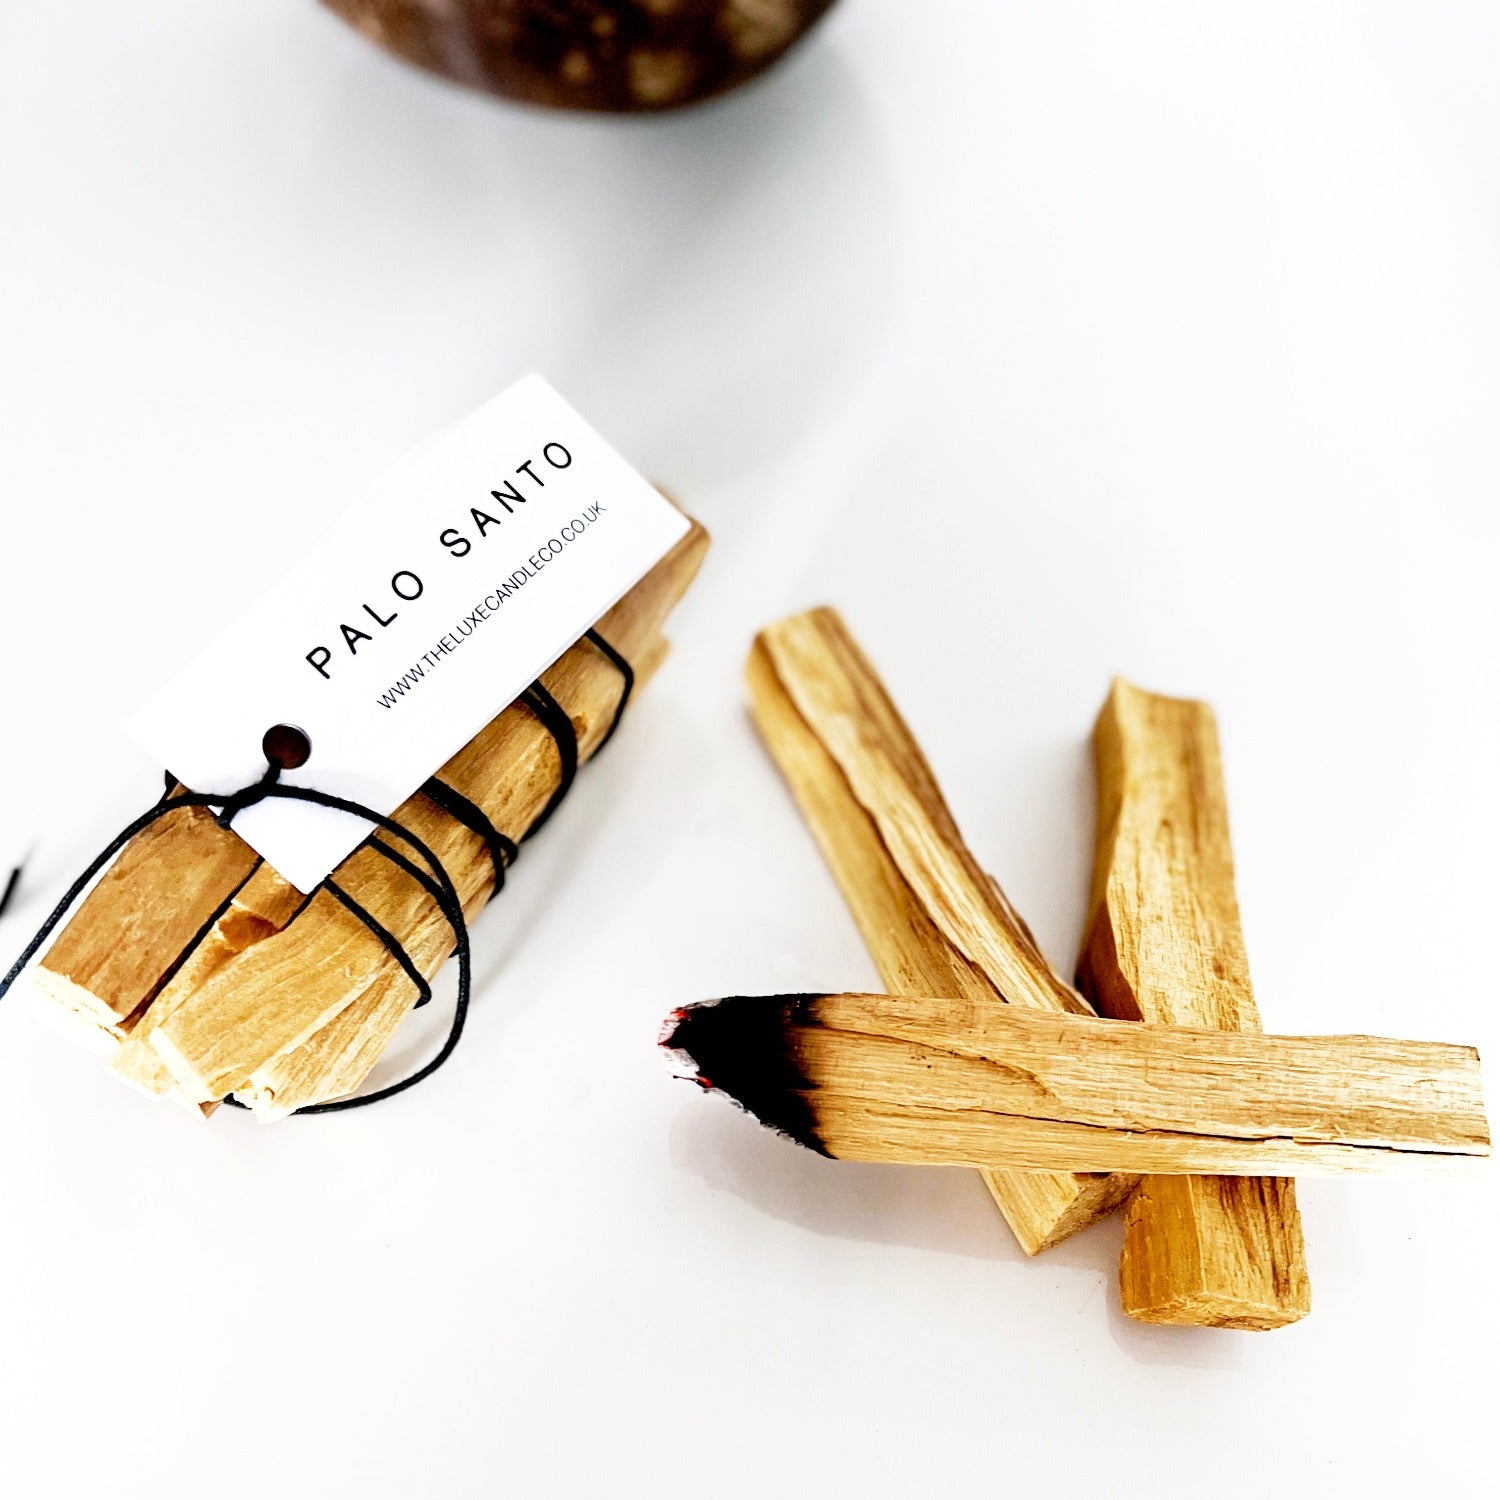 Palo santo sticks How to Use - The Luxe Candle Co Wellness + Self Care Collection